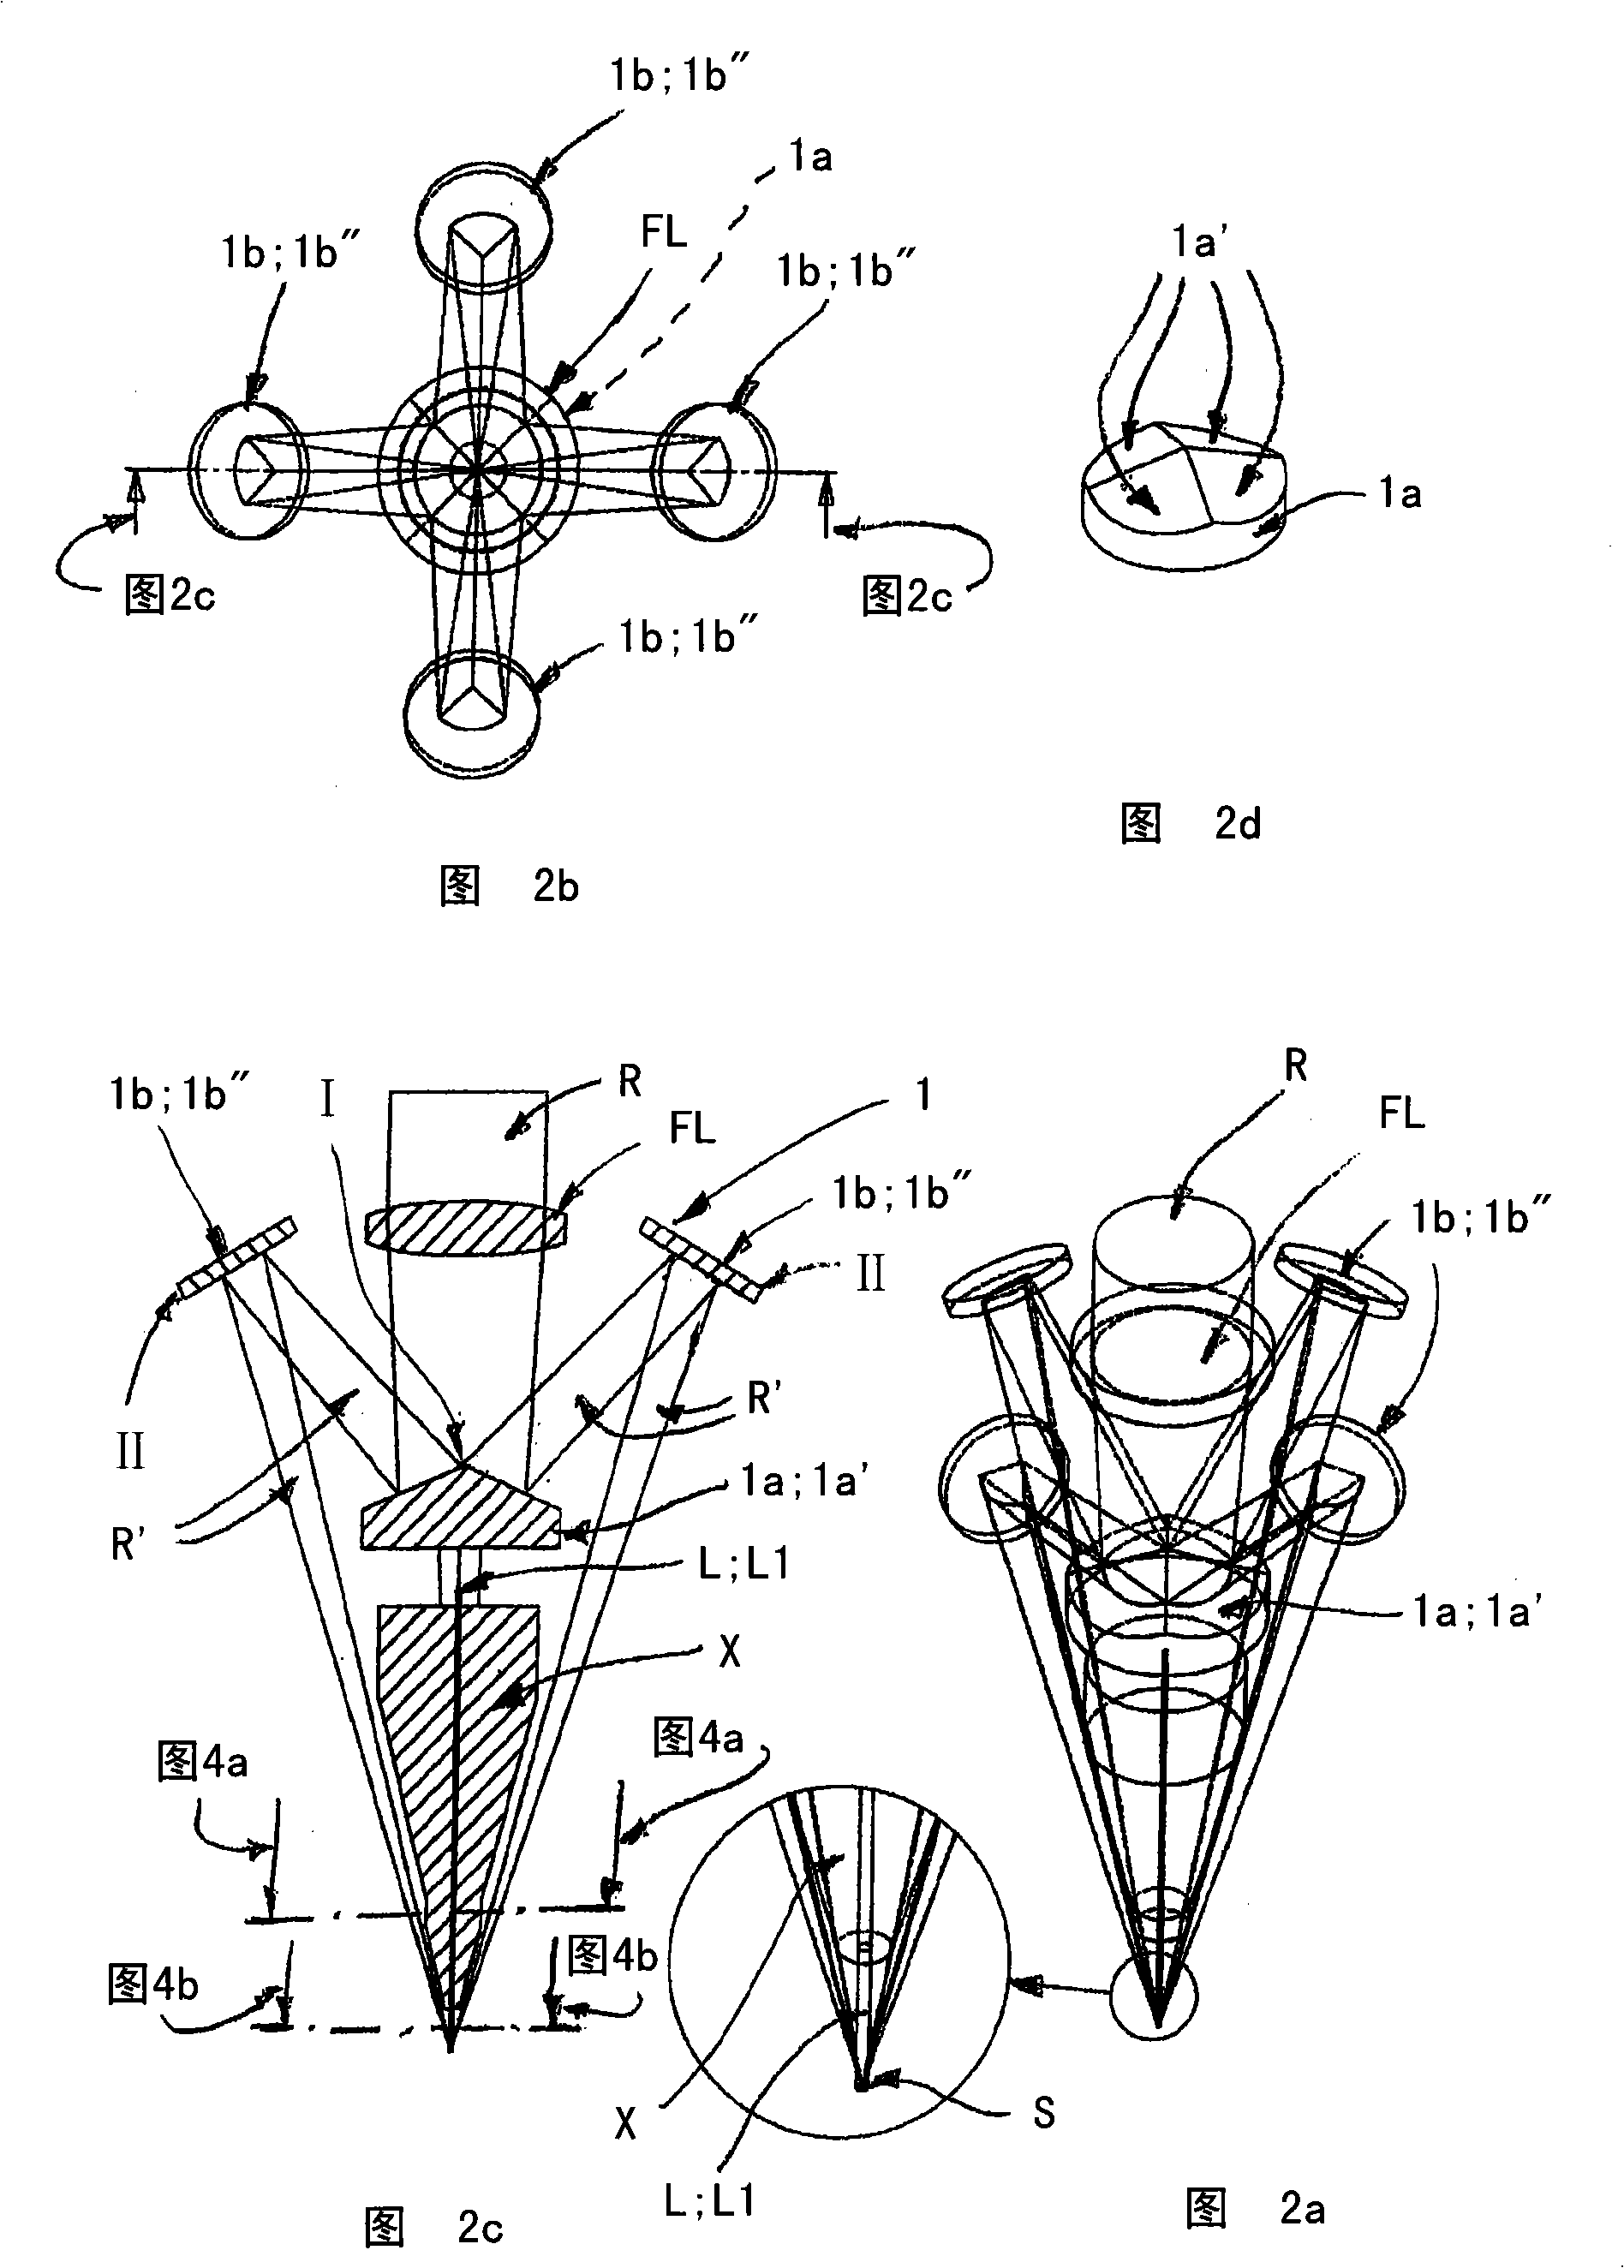 Method and apparatus in connection with laser use